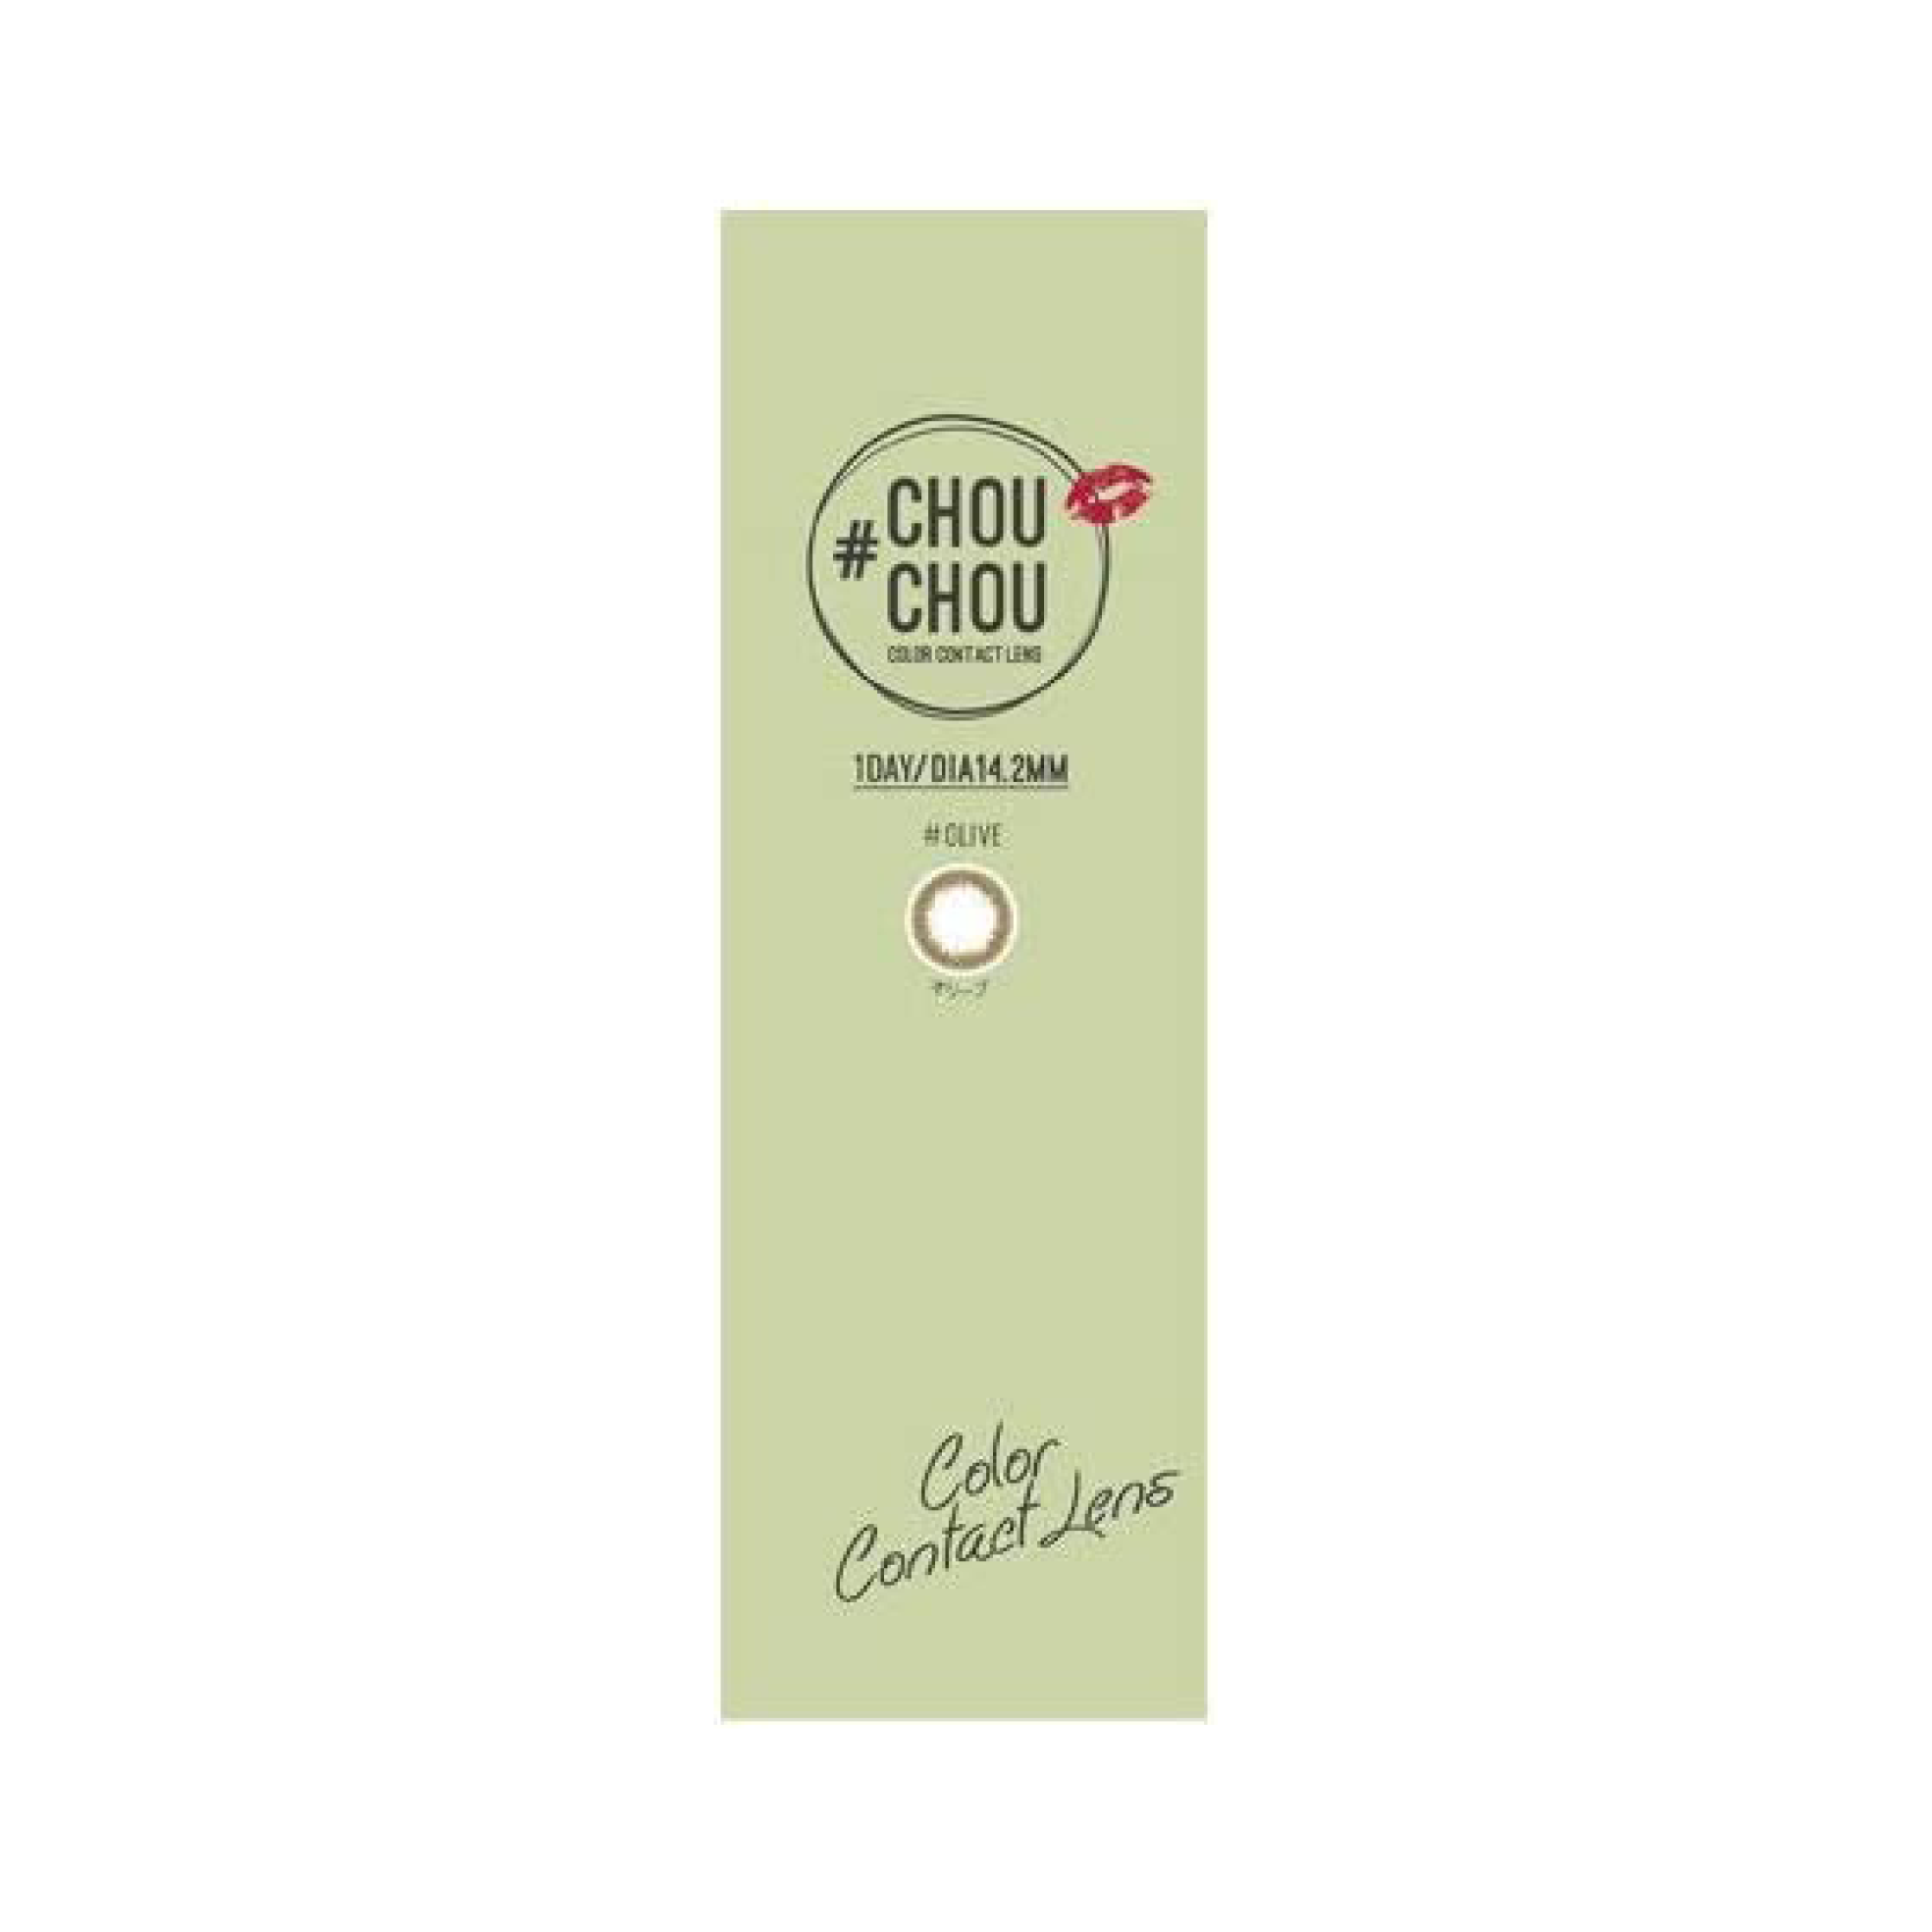 Chouchou 1-Day color contact lens #Olive日抛美瞳青橄榄｜10 Pcs